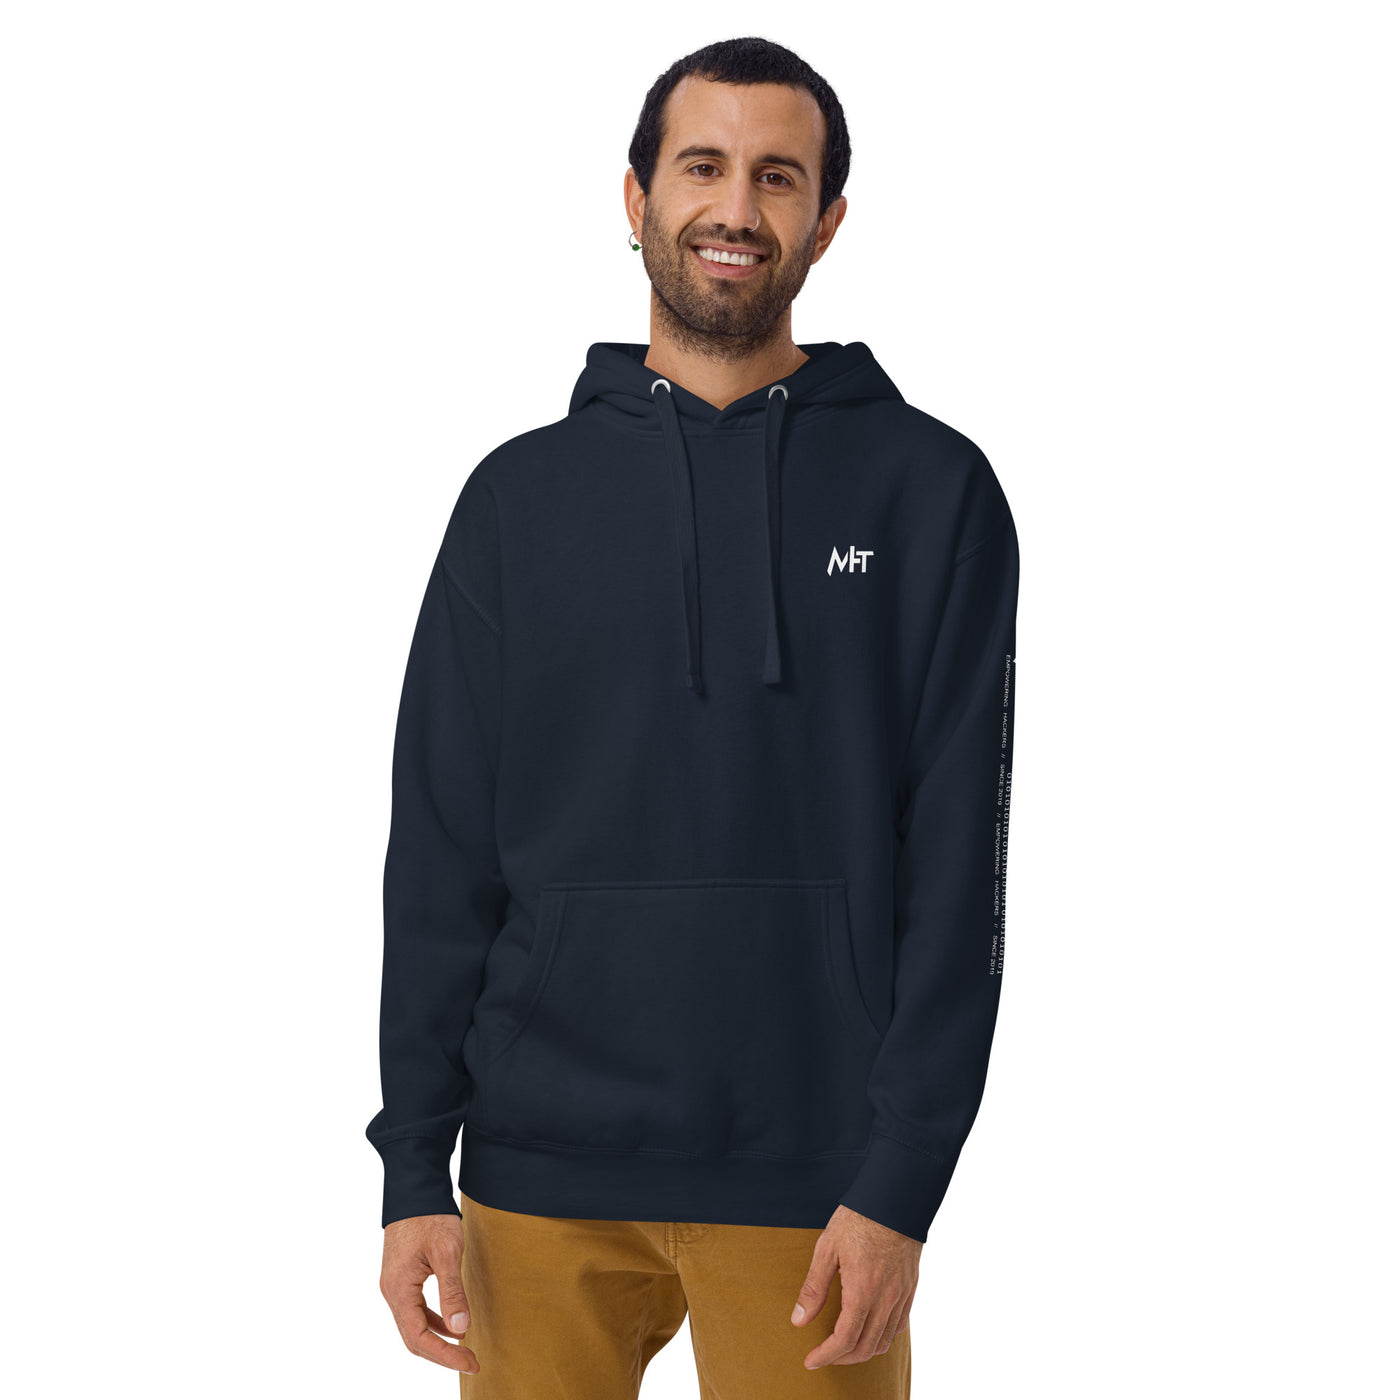 I have your Wi-Fi password - Unisex Hoodie (back print)